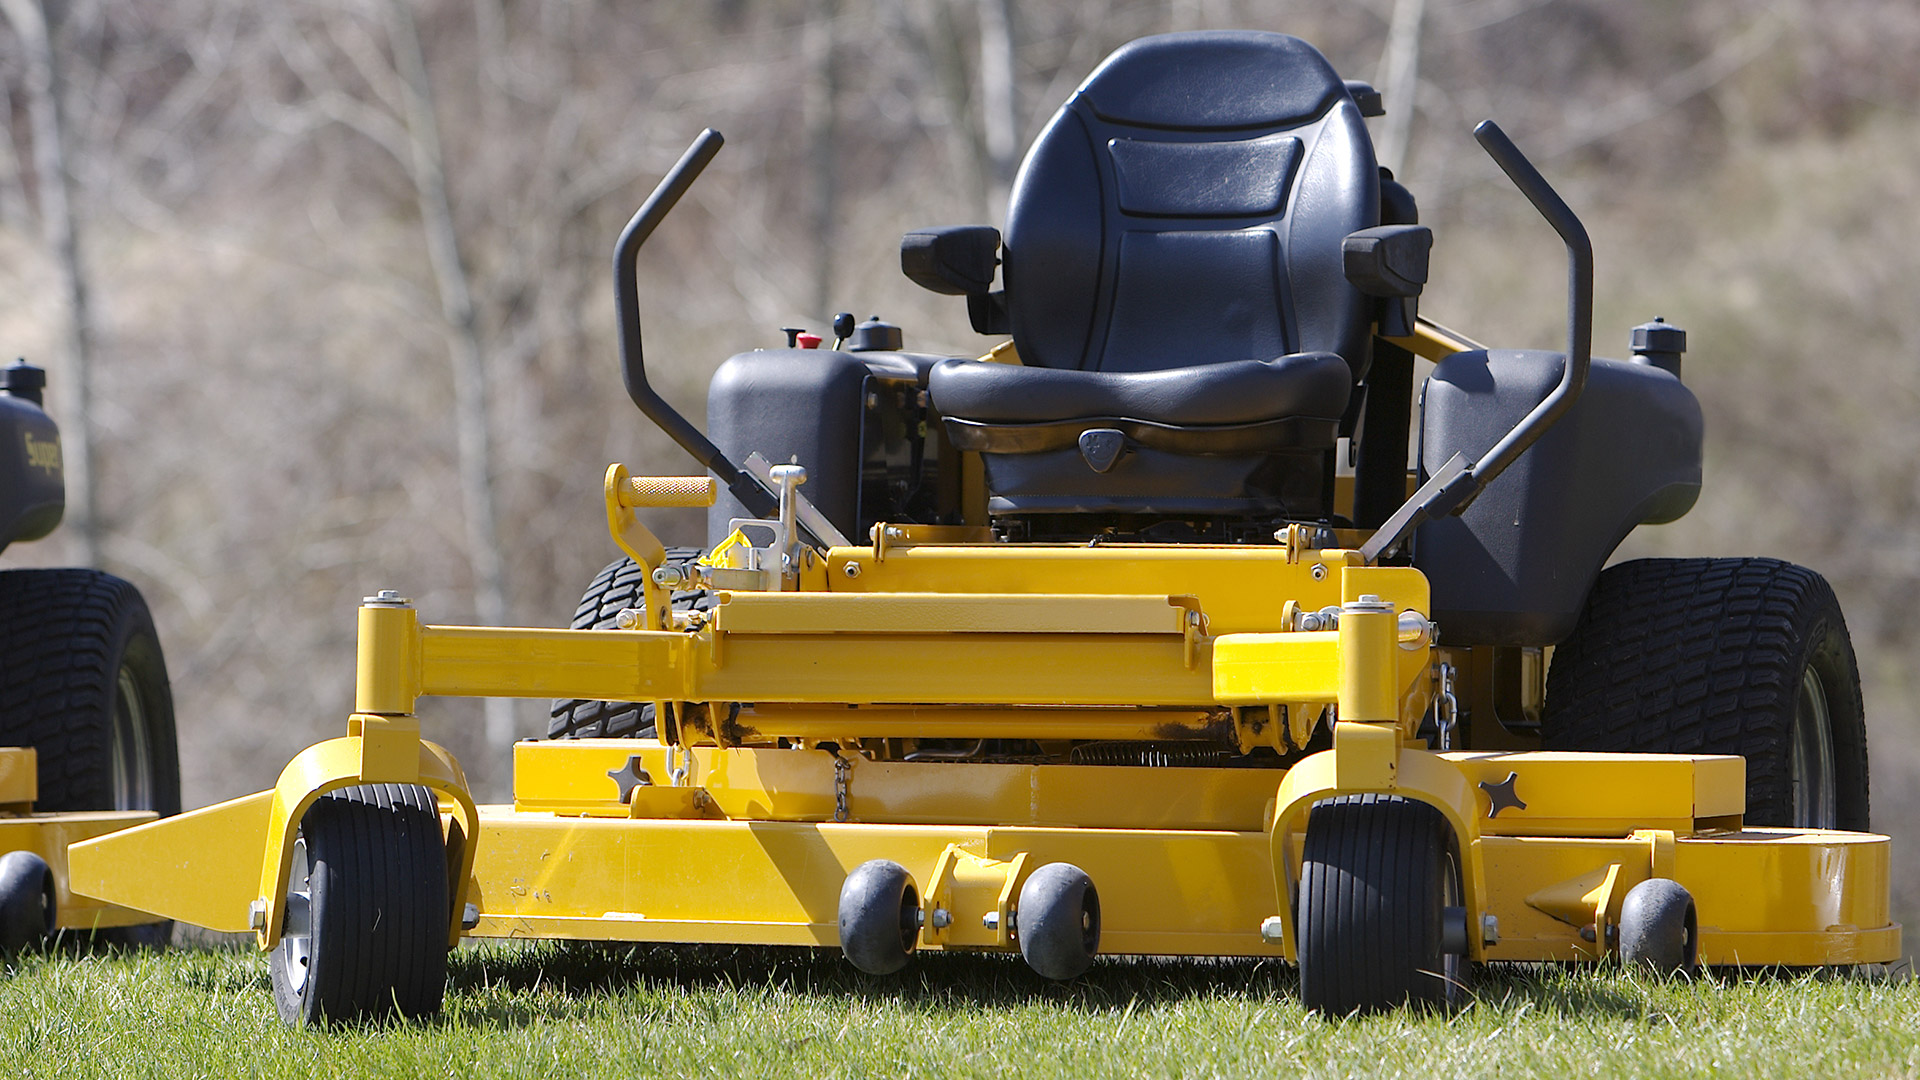 3 Reasons to Hire Professionals to Mow Your Lawn